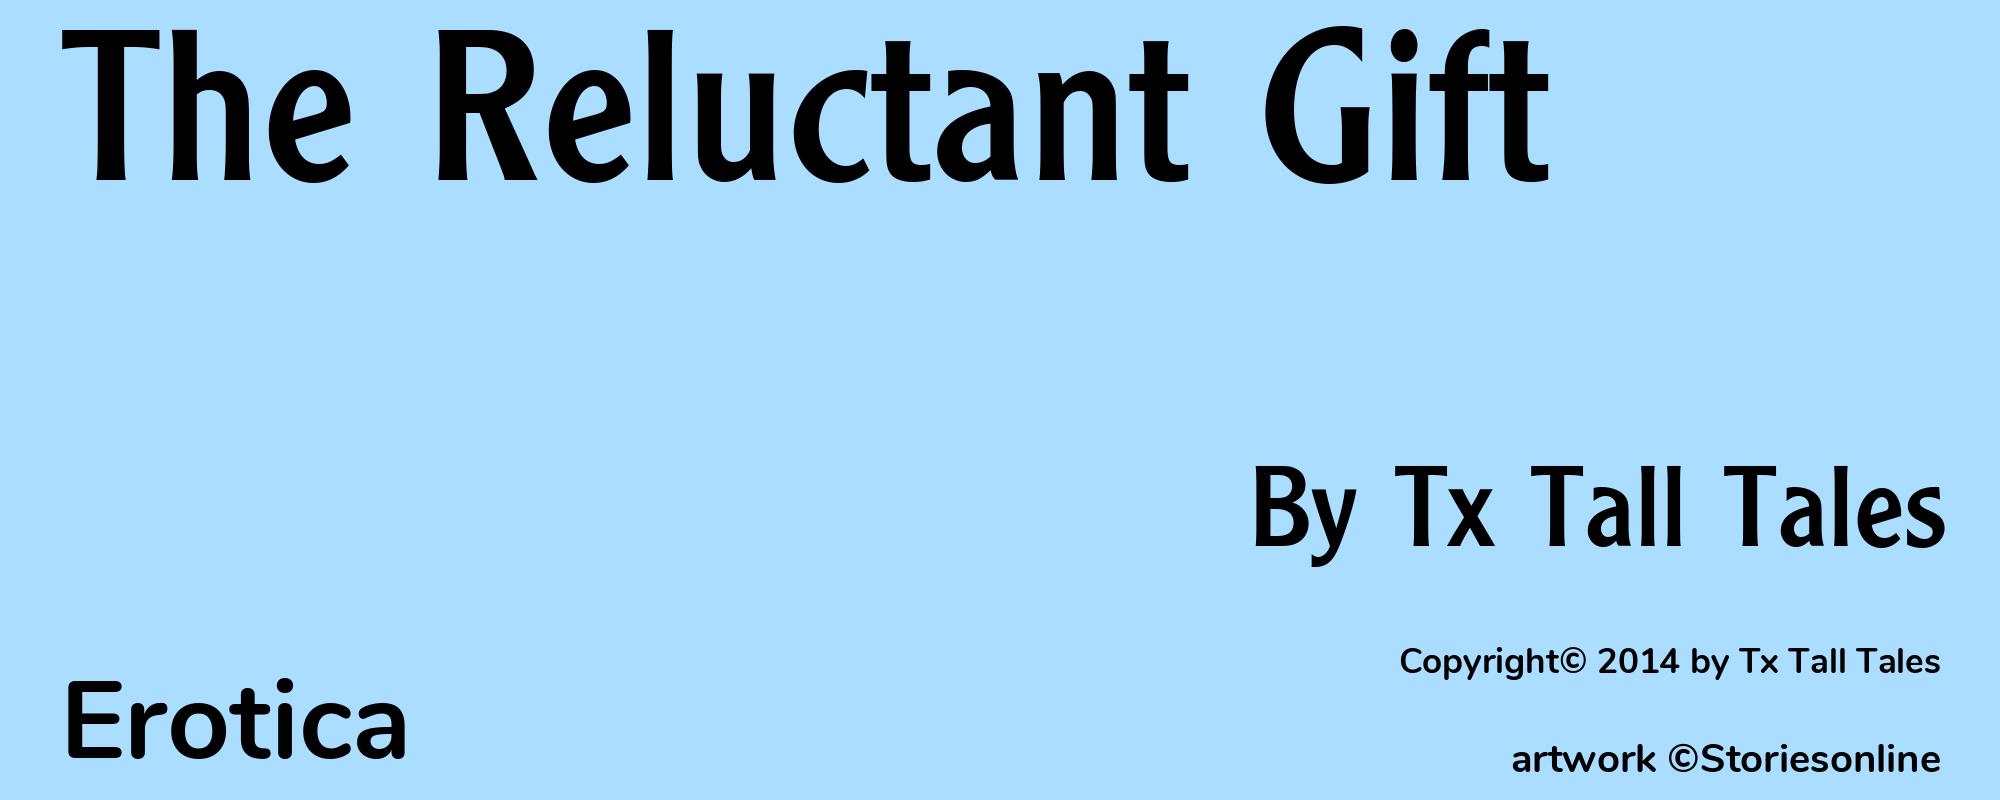 The Reluctant Gift - Cover